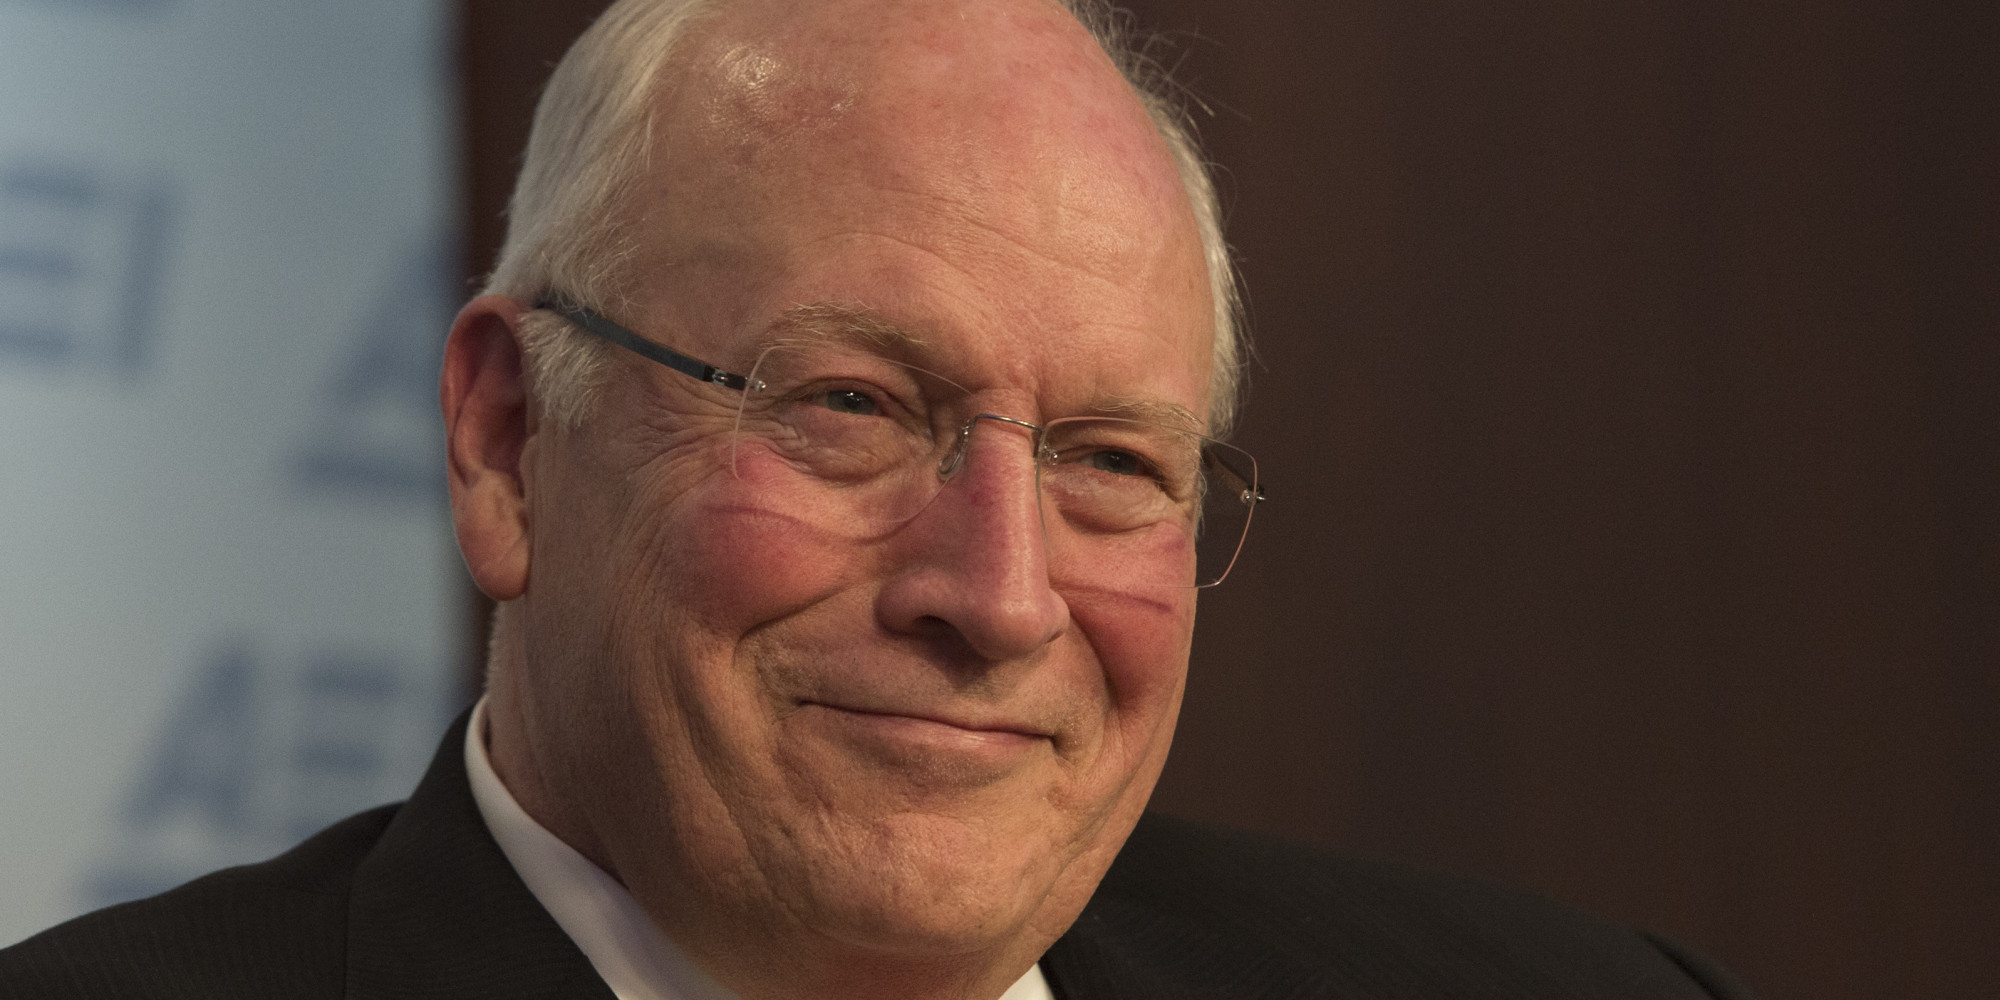 Dick cheney started the iraq war